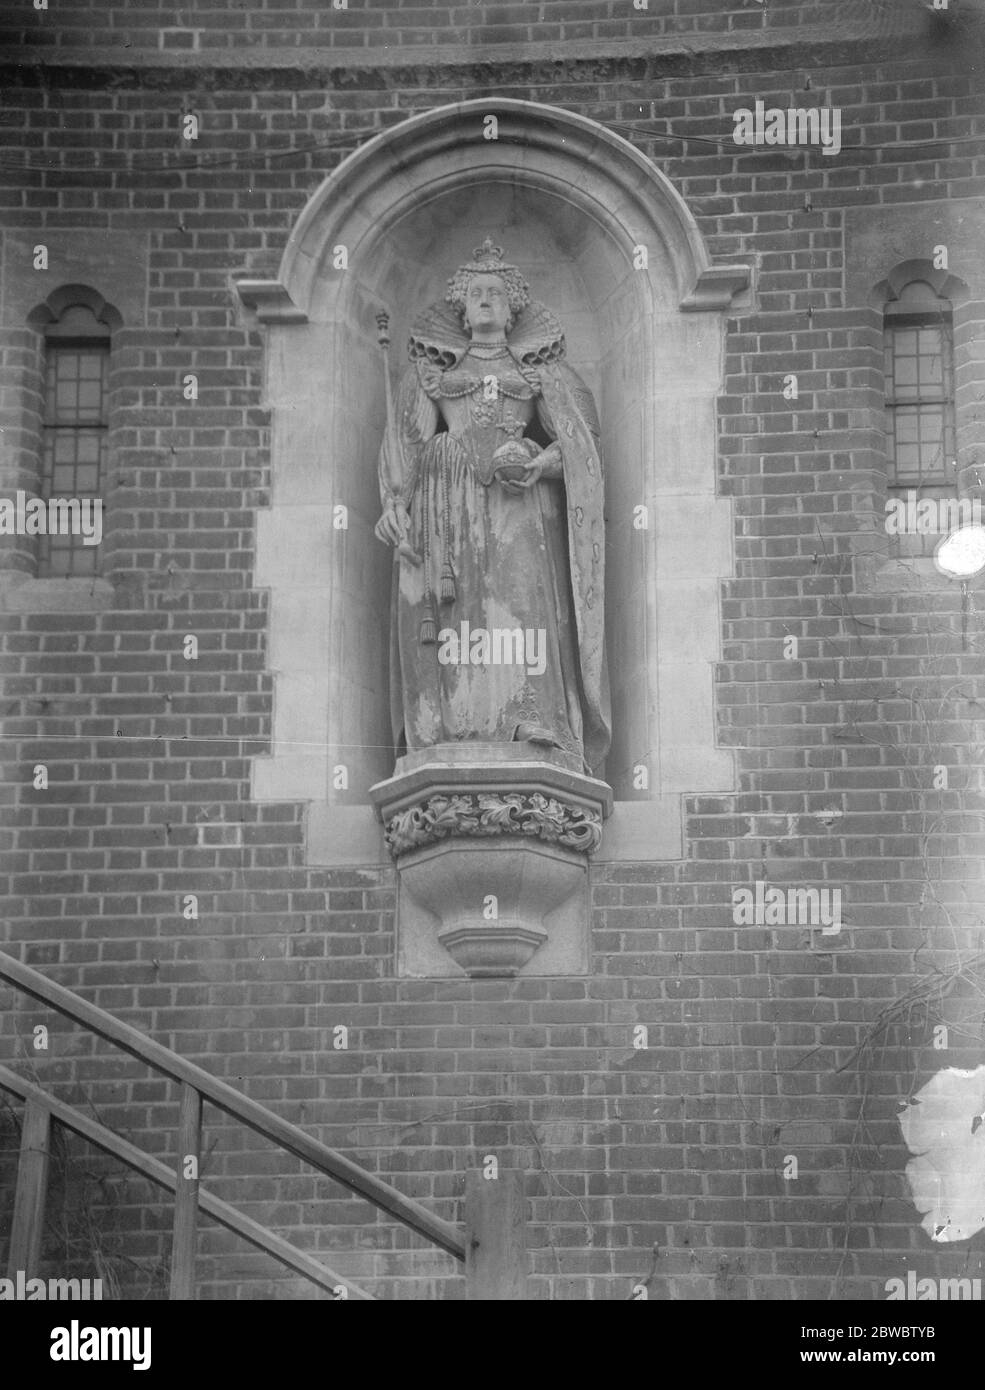 Statue of Queen Elizabeth on Tower of Harrow school speech room . Lord George Hamilton and his brothers have presented to Harrow School a statue of Queen Elizabeth , which has been placed on the tower of the Speech Room , in memory of the late lord Claud Hamilton . The statue effectively placed in a decorative niche of the Tower . 13 November 1925 Stock Photo